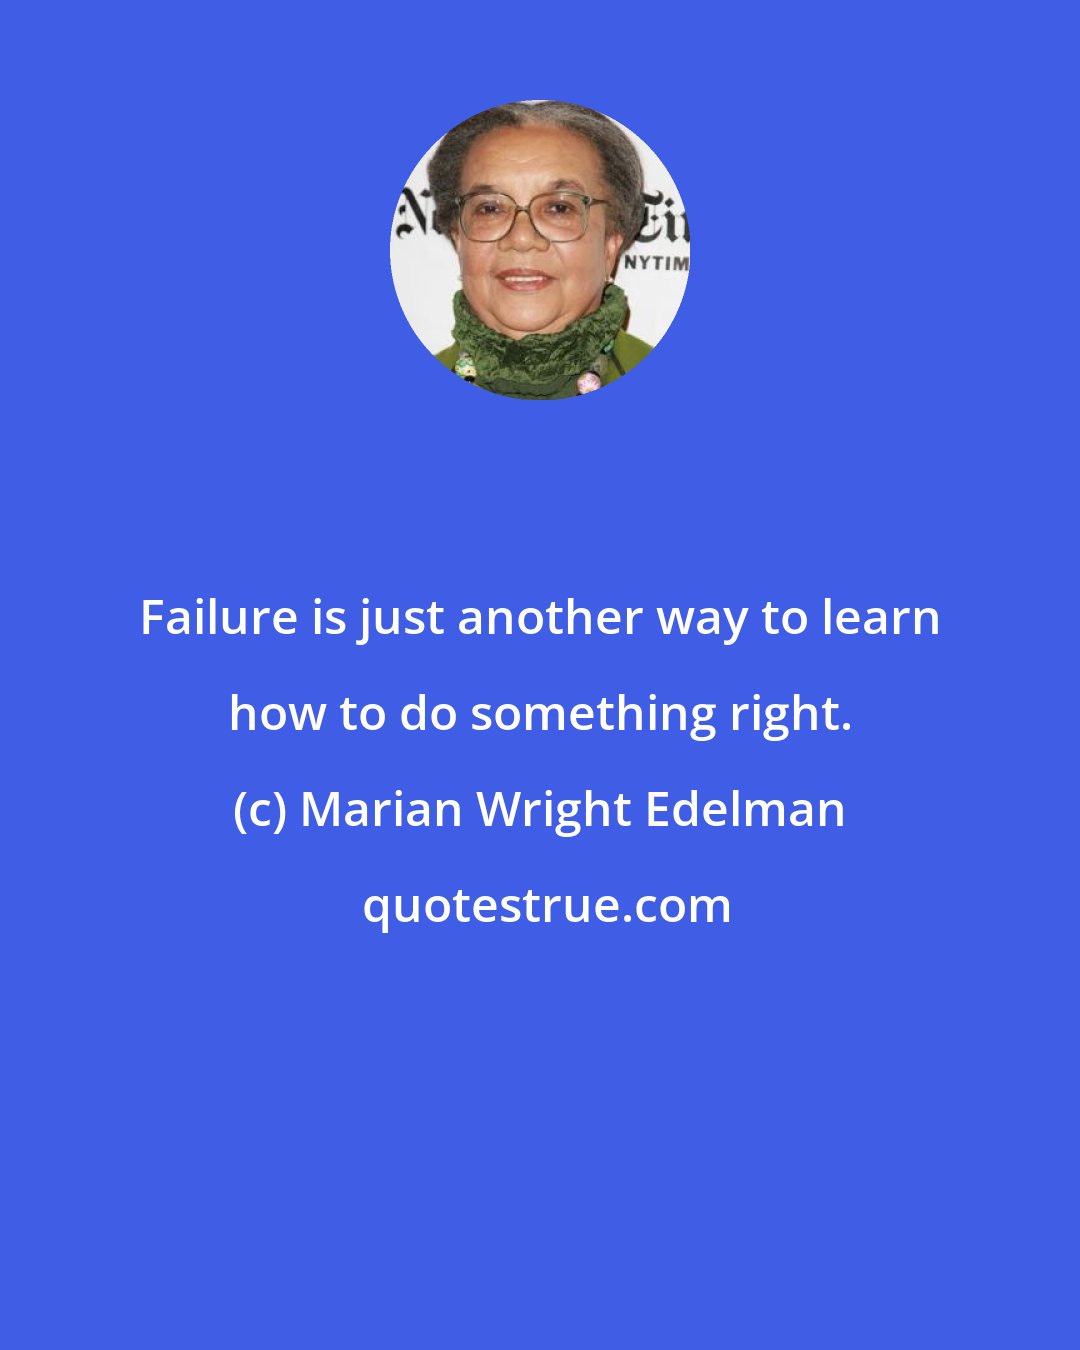 Marian Wright Edelman: Failure is just another way to learn how to do something right.